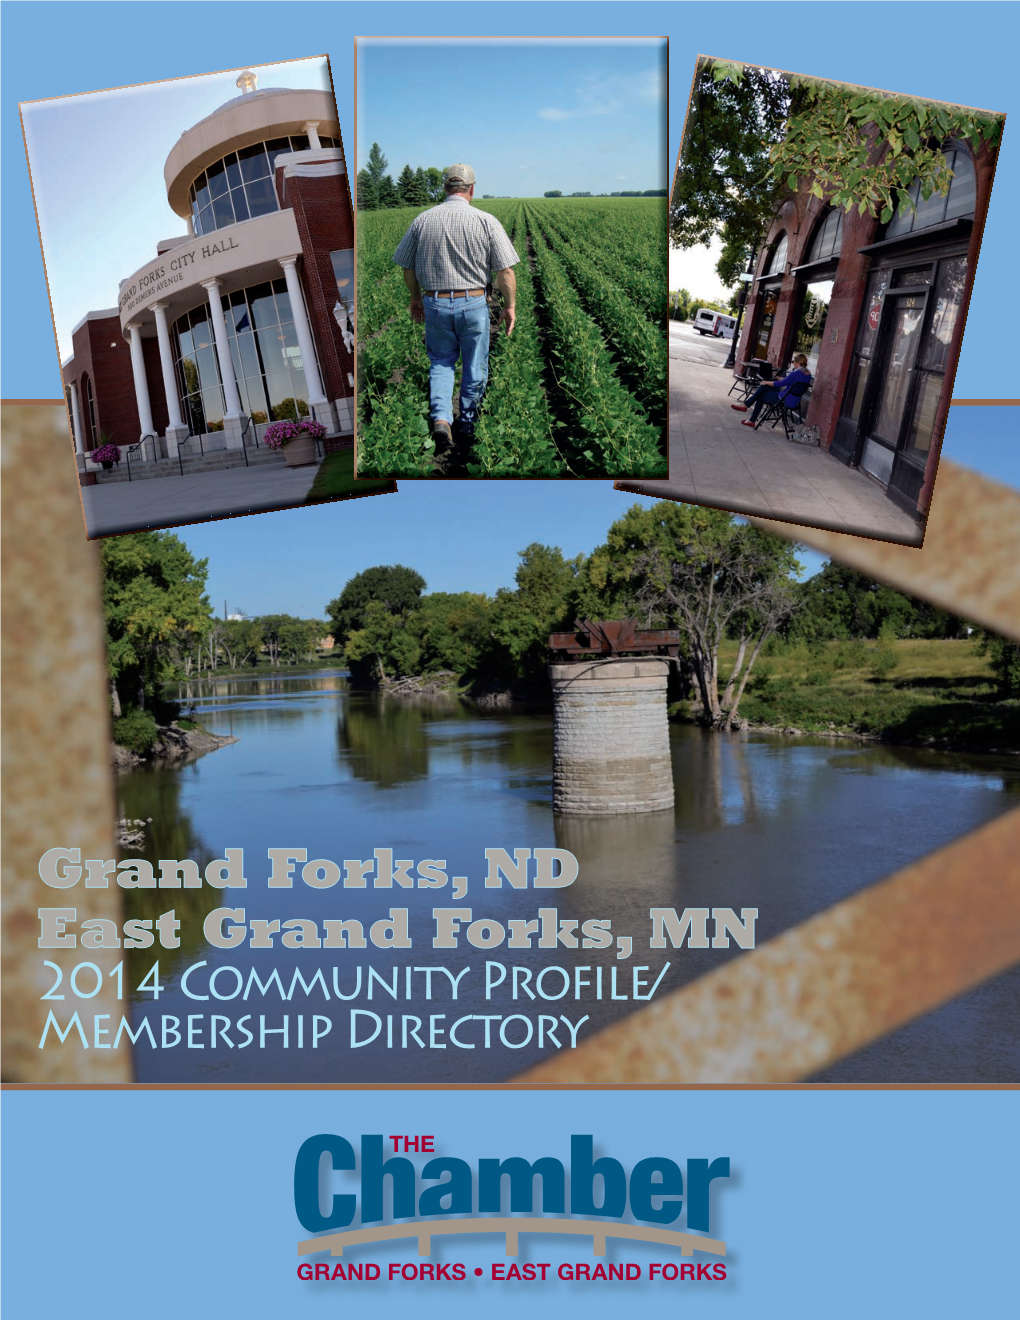 Grand Forks, ND East Grand Forks, MN 2014 Community Profile/ Membership Directory